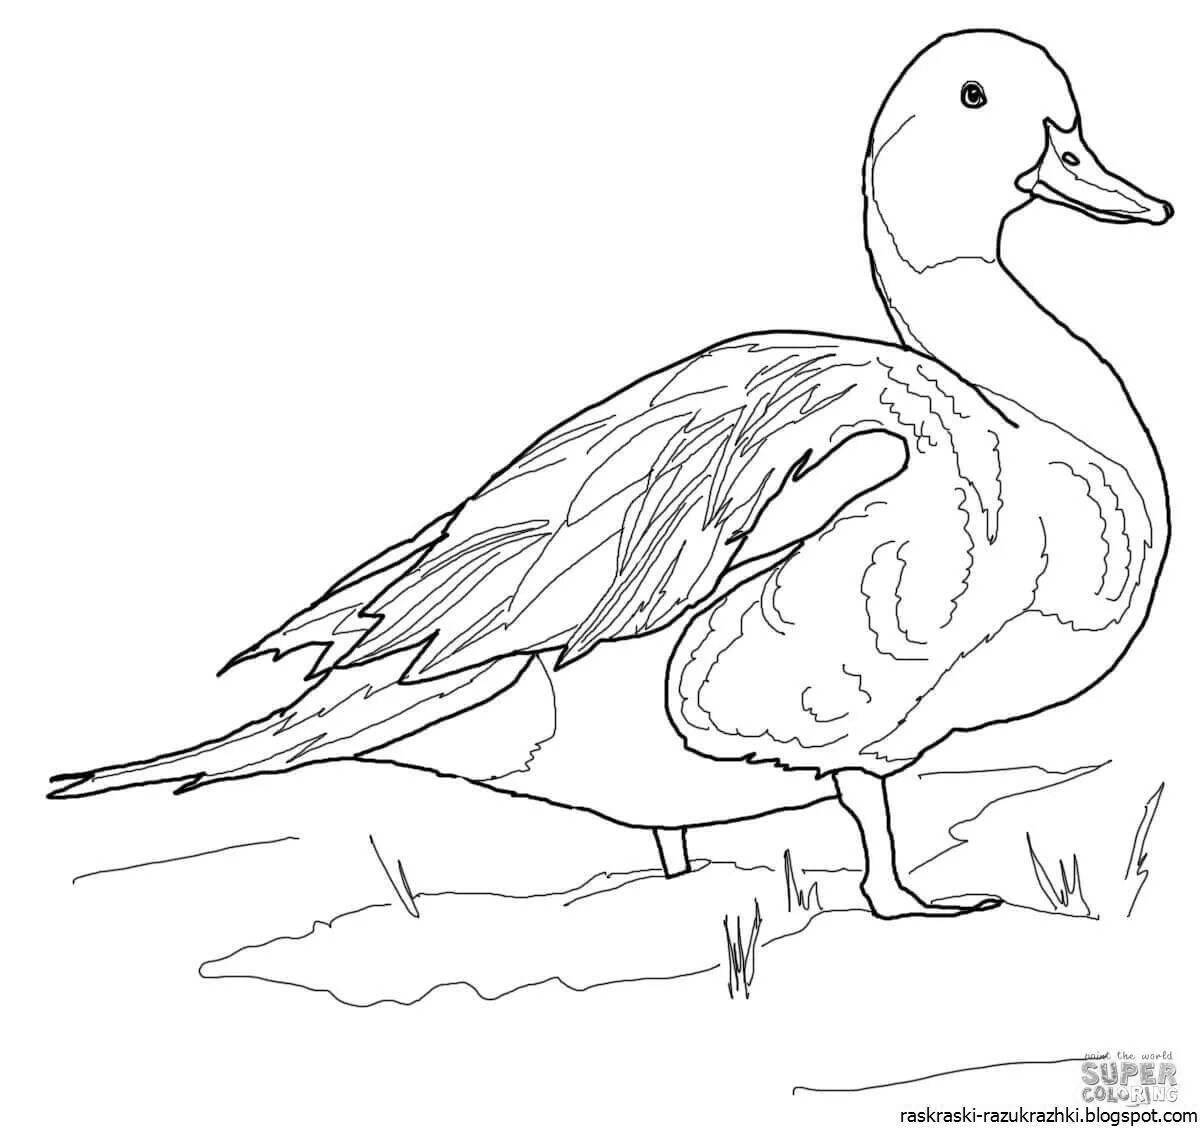 Playful duck coloring book for kids